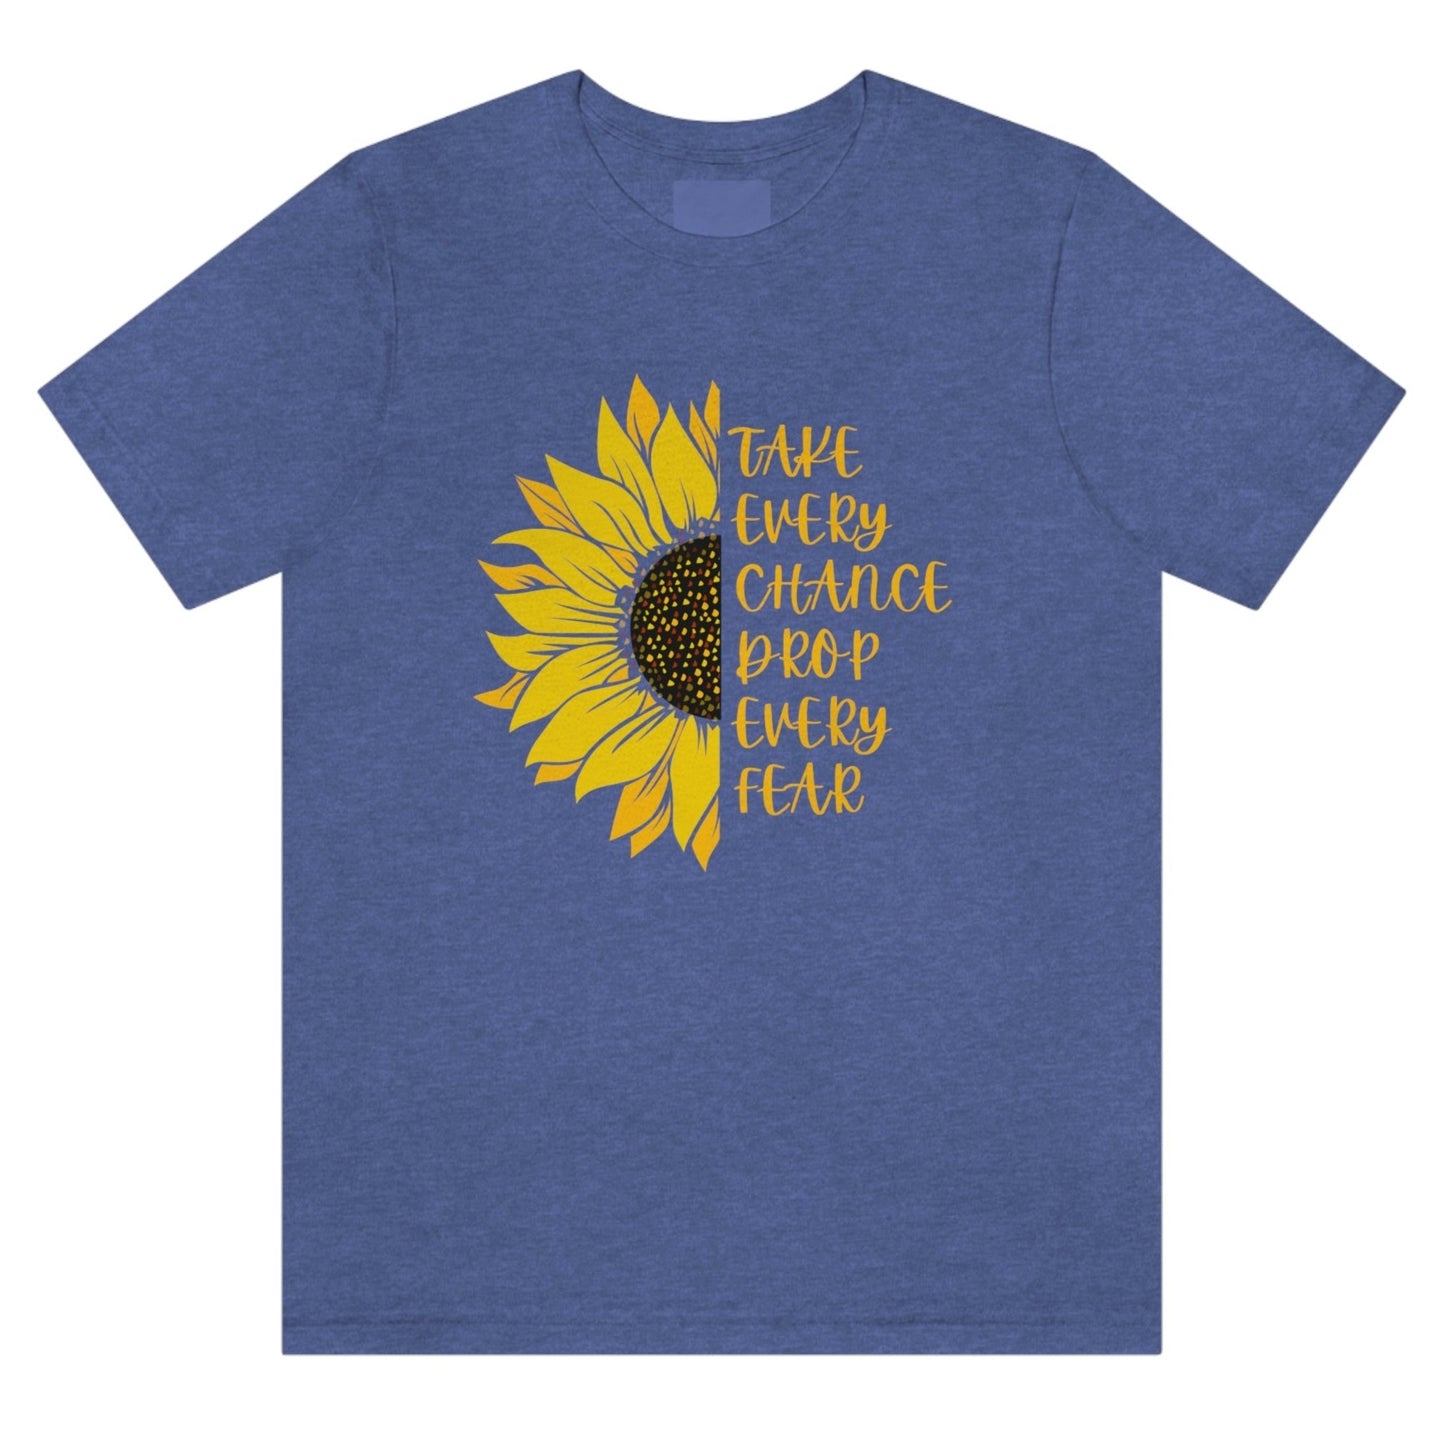 take-every-chance-drop-every-fear-heather-true-royal-blue-t-shirt-sunflower